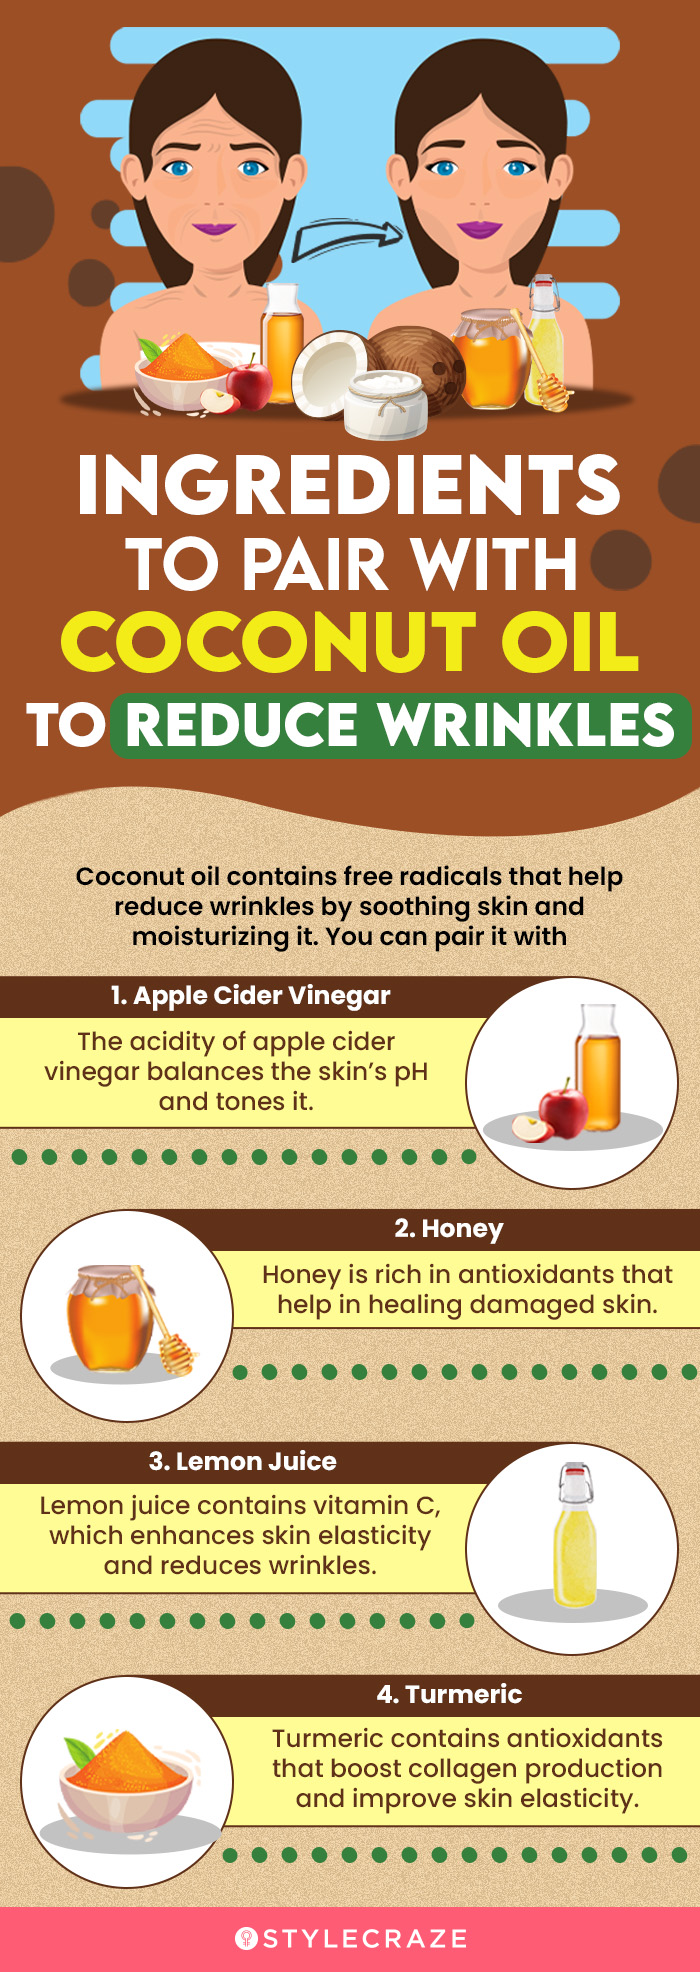 ingredients to pair with coconut oil to reduce wrinkles (infographic)